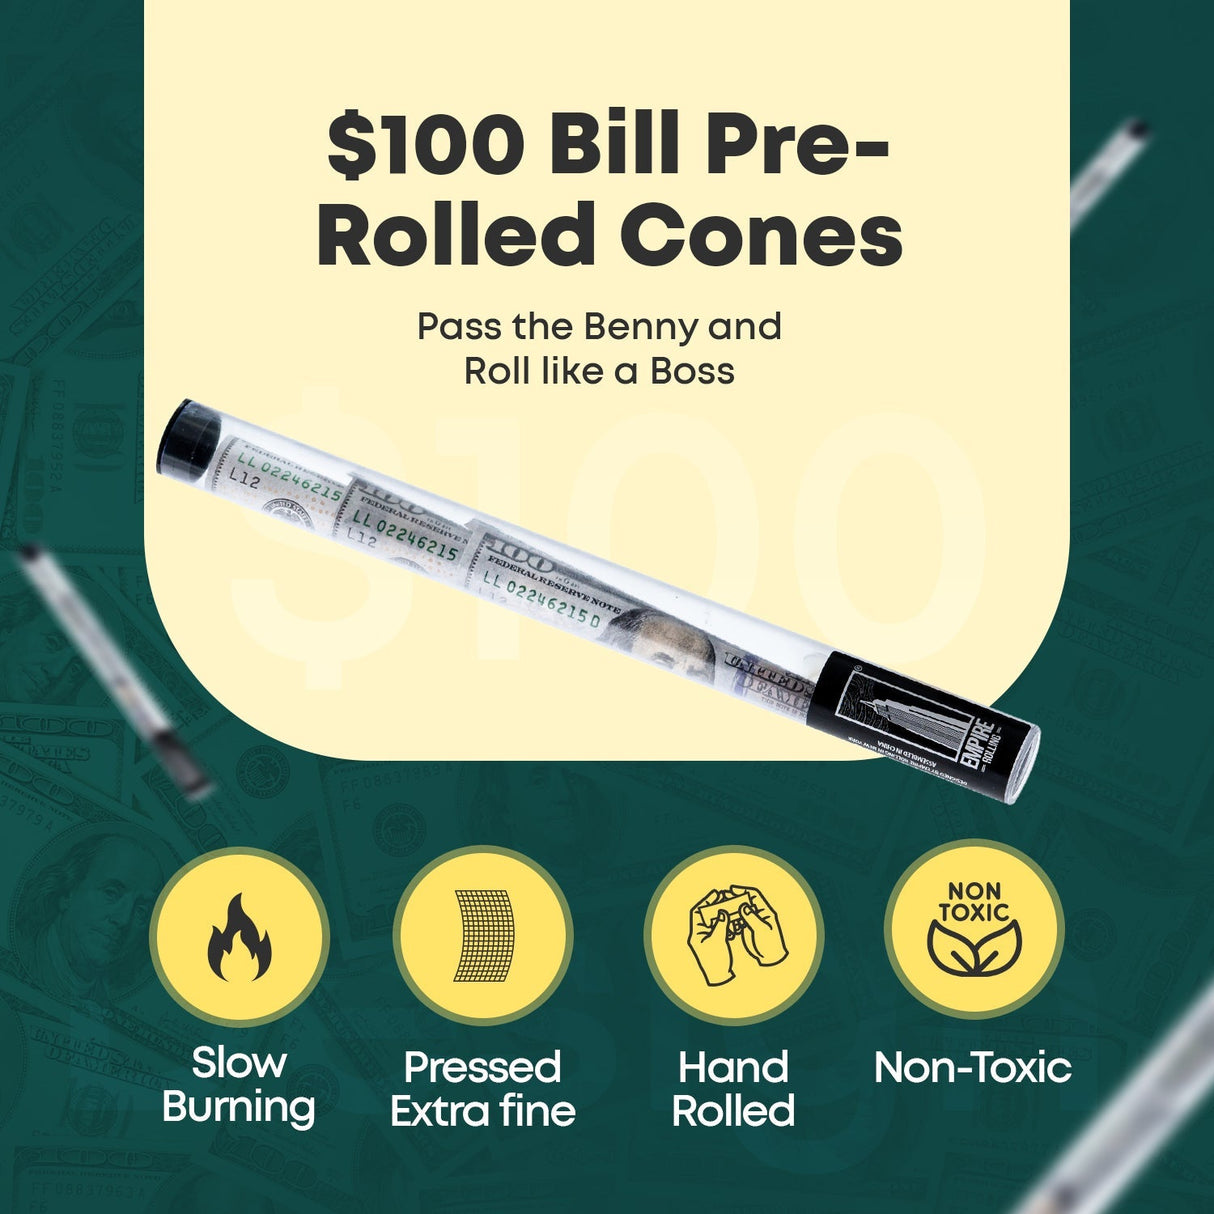 BENNY OG Cones by Empire Rolling Papers resembling $100 bills - Front View